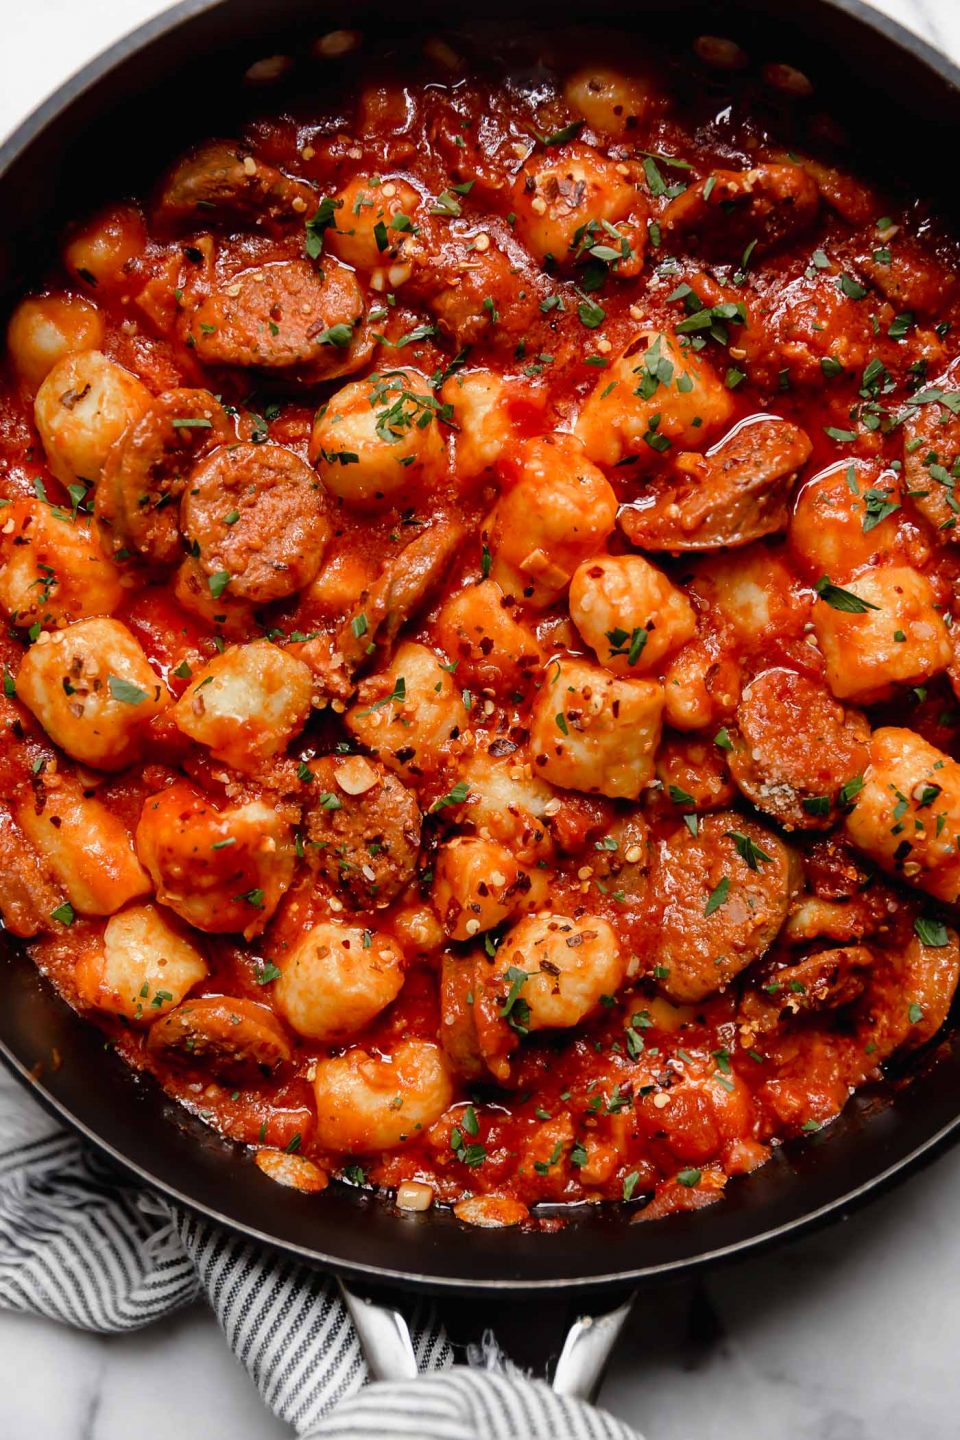 Gnocchi all'Amatriciana, with sliced Italian sausage in a black skillet. A striped linen is wrapped around the skillet handle. The skillet is on a white marble surface.